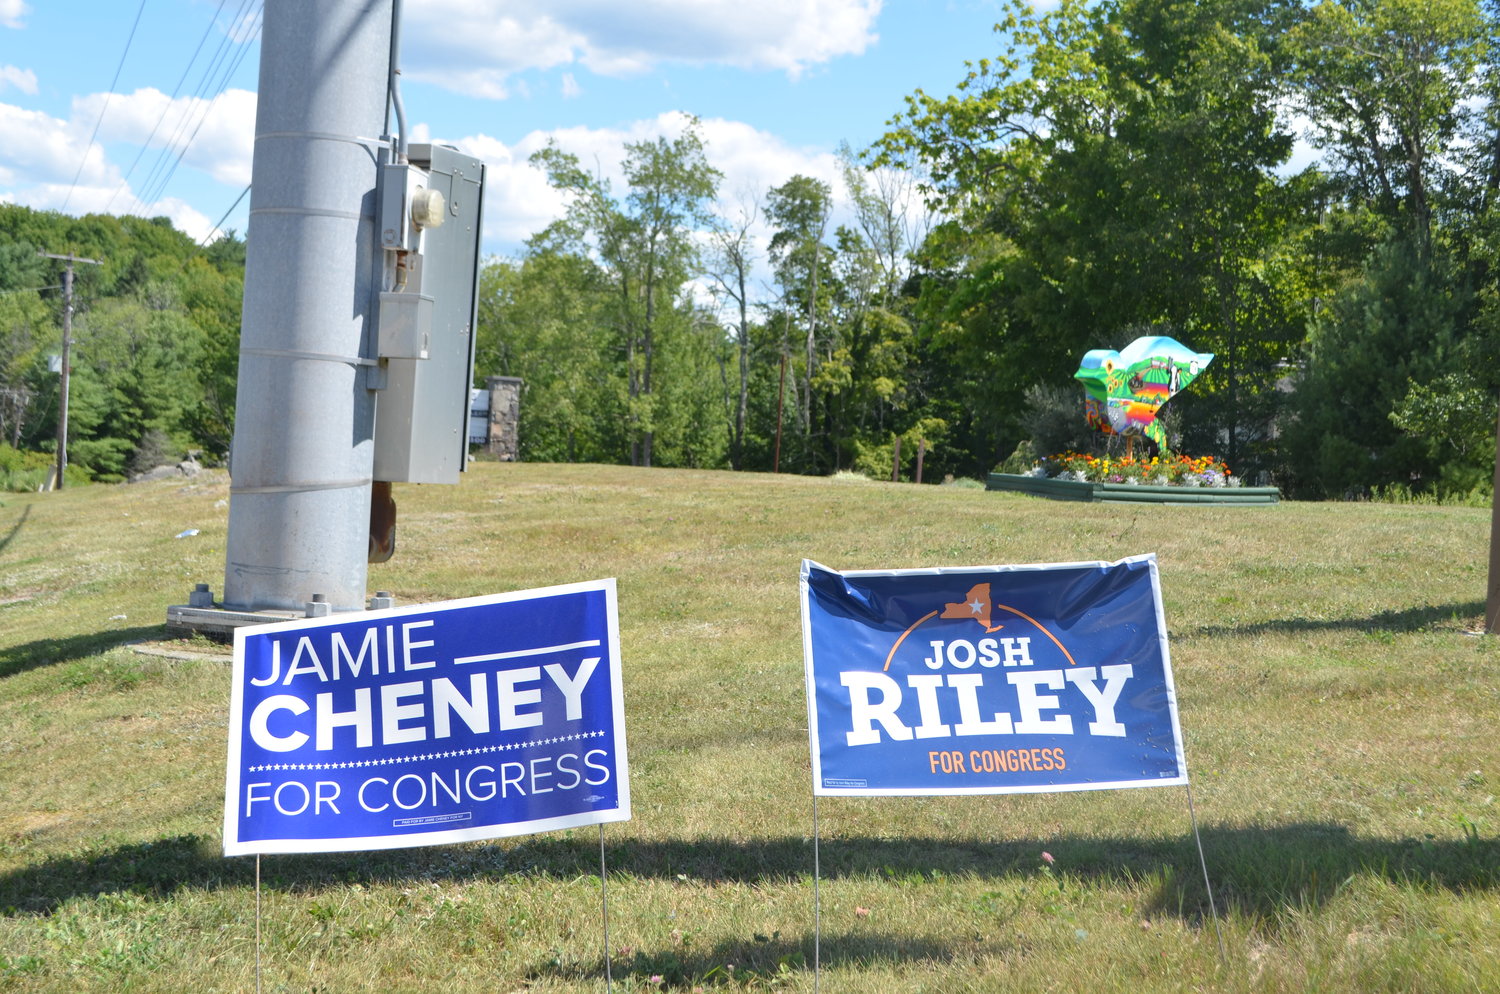 Jaimie Cheny and Josh Riley are two of the candidates vying on election day, August 23.